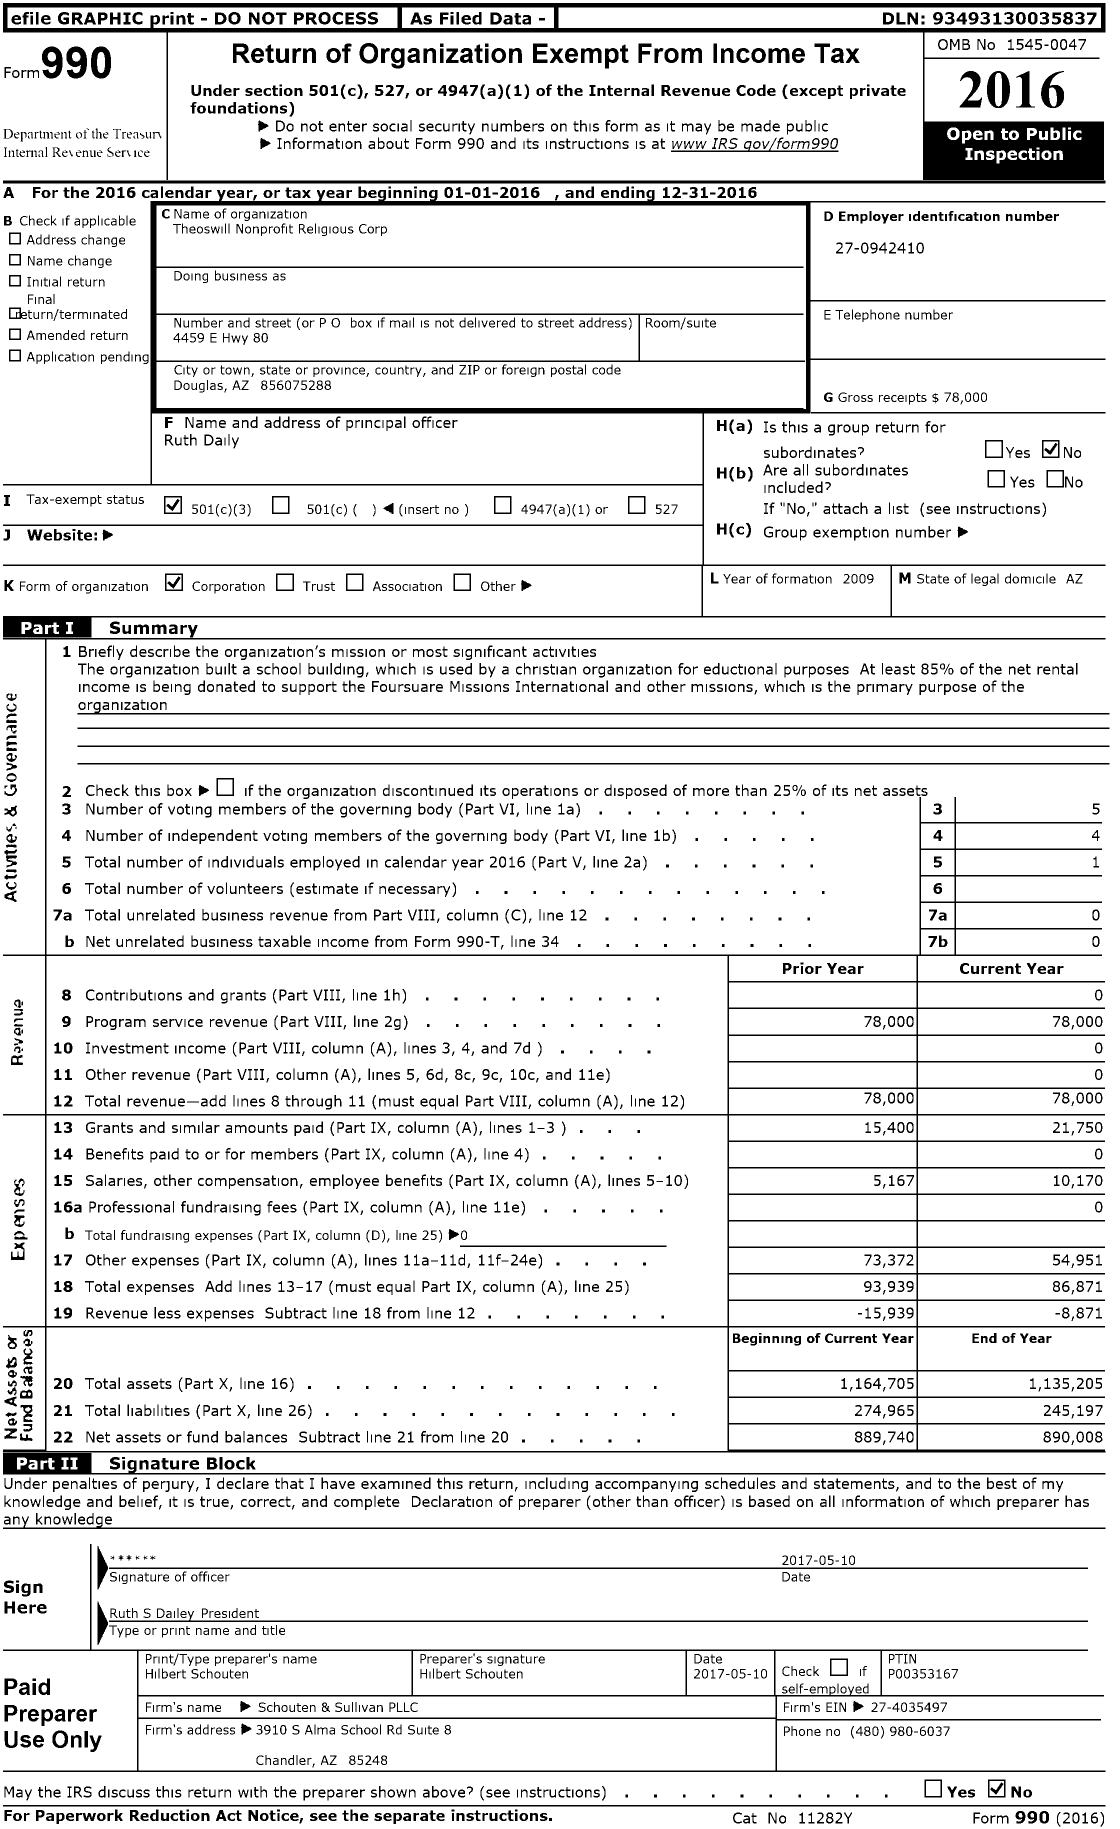 Image of first page of 2016 Form 990 for Theoswill Nonprofit Religious Corp